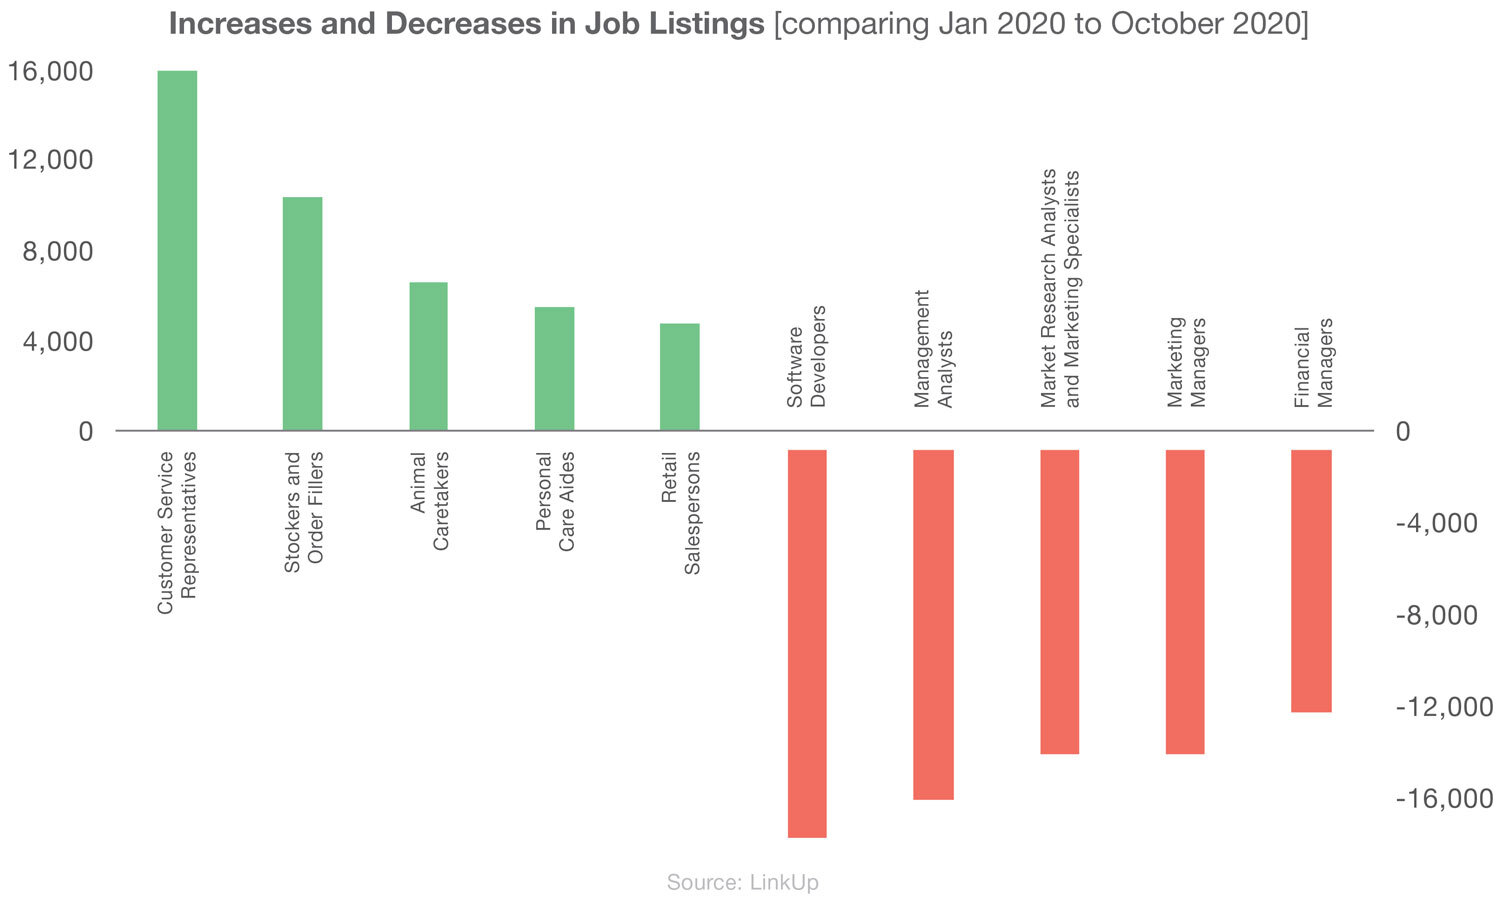 Increases and decreases in job listings from January 2020 to October 2020